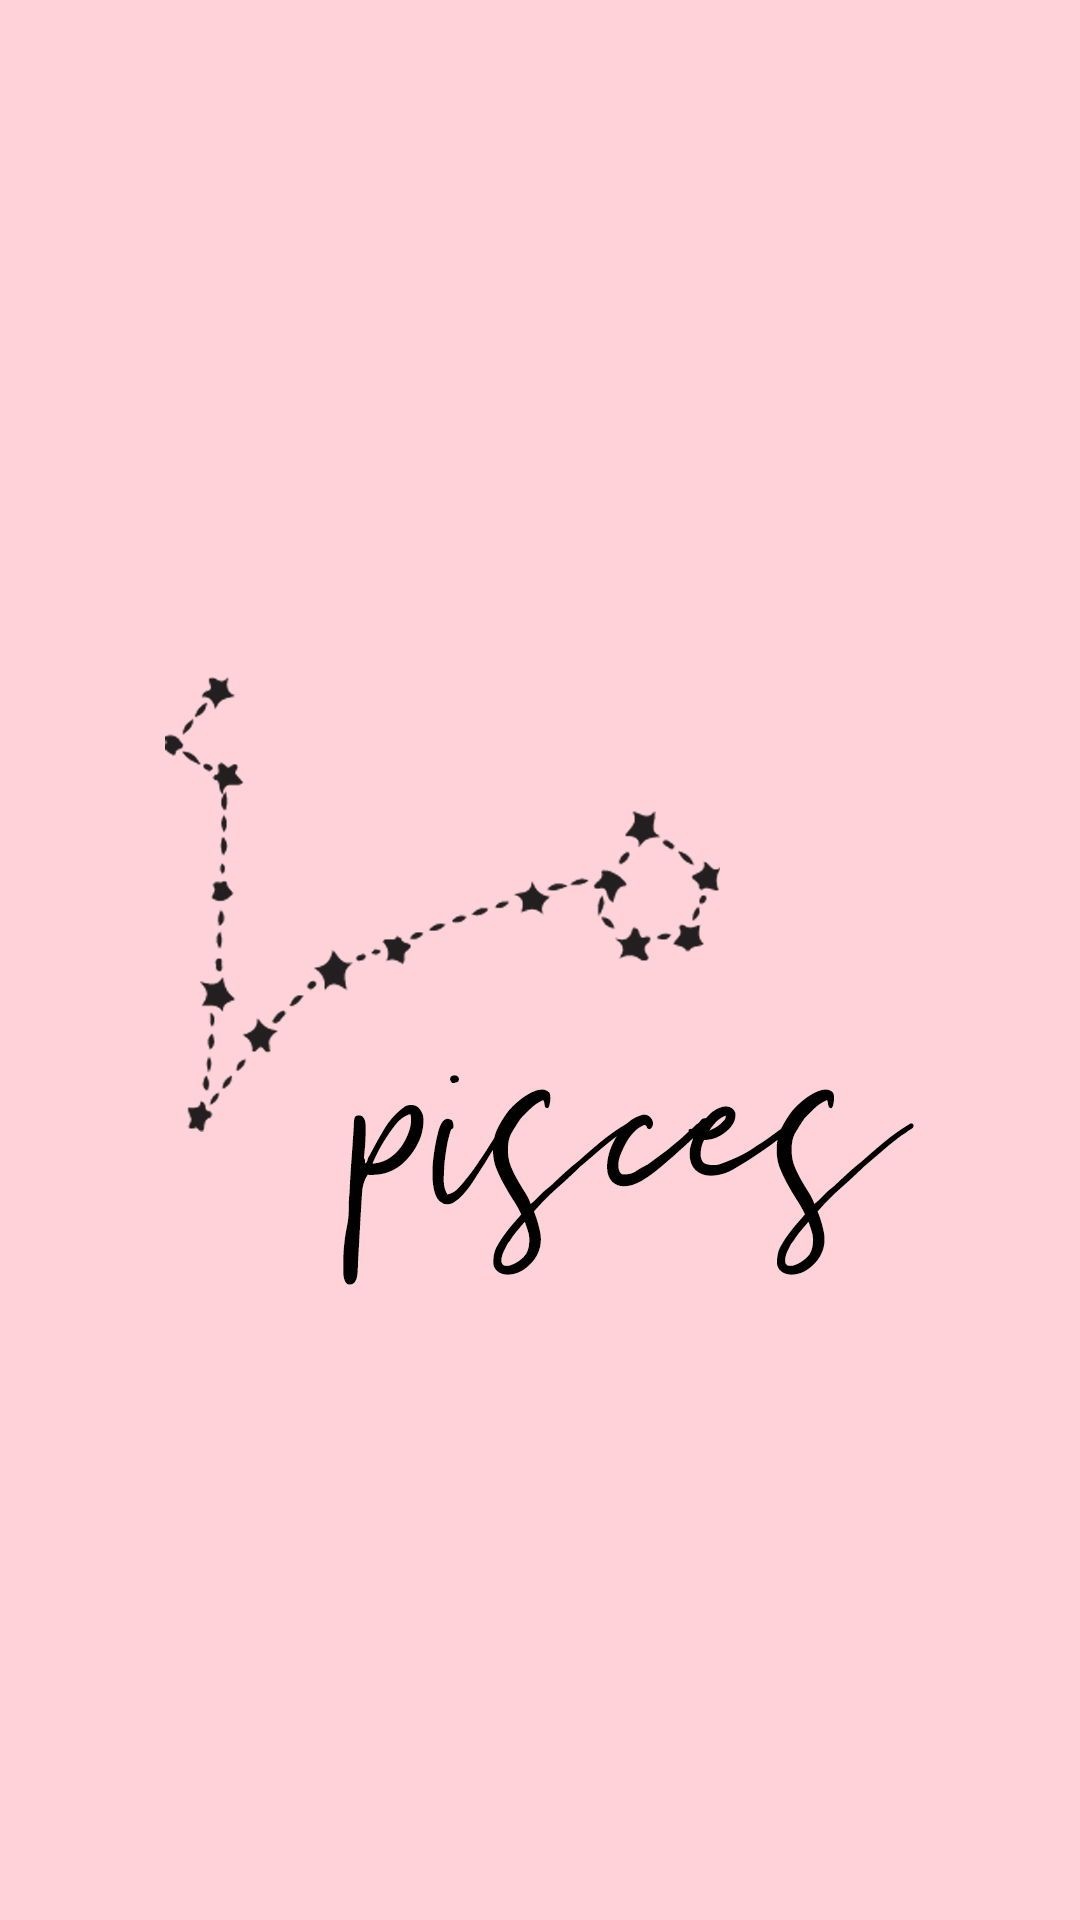 Pisces Zodiac Sign, Aesthetic iPhone wallpapers, Picture collage wall, Cute visuals, 1080x1920 Full HD Handy